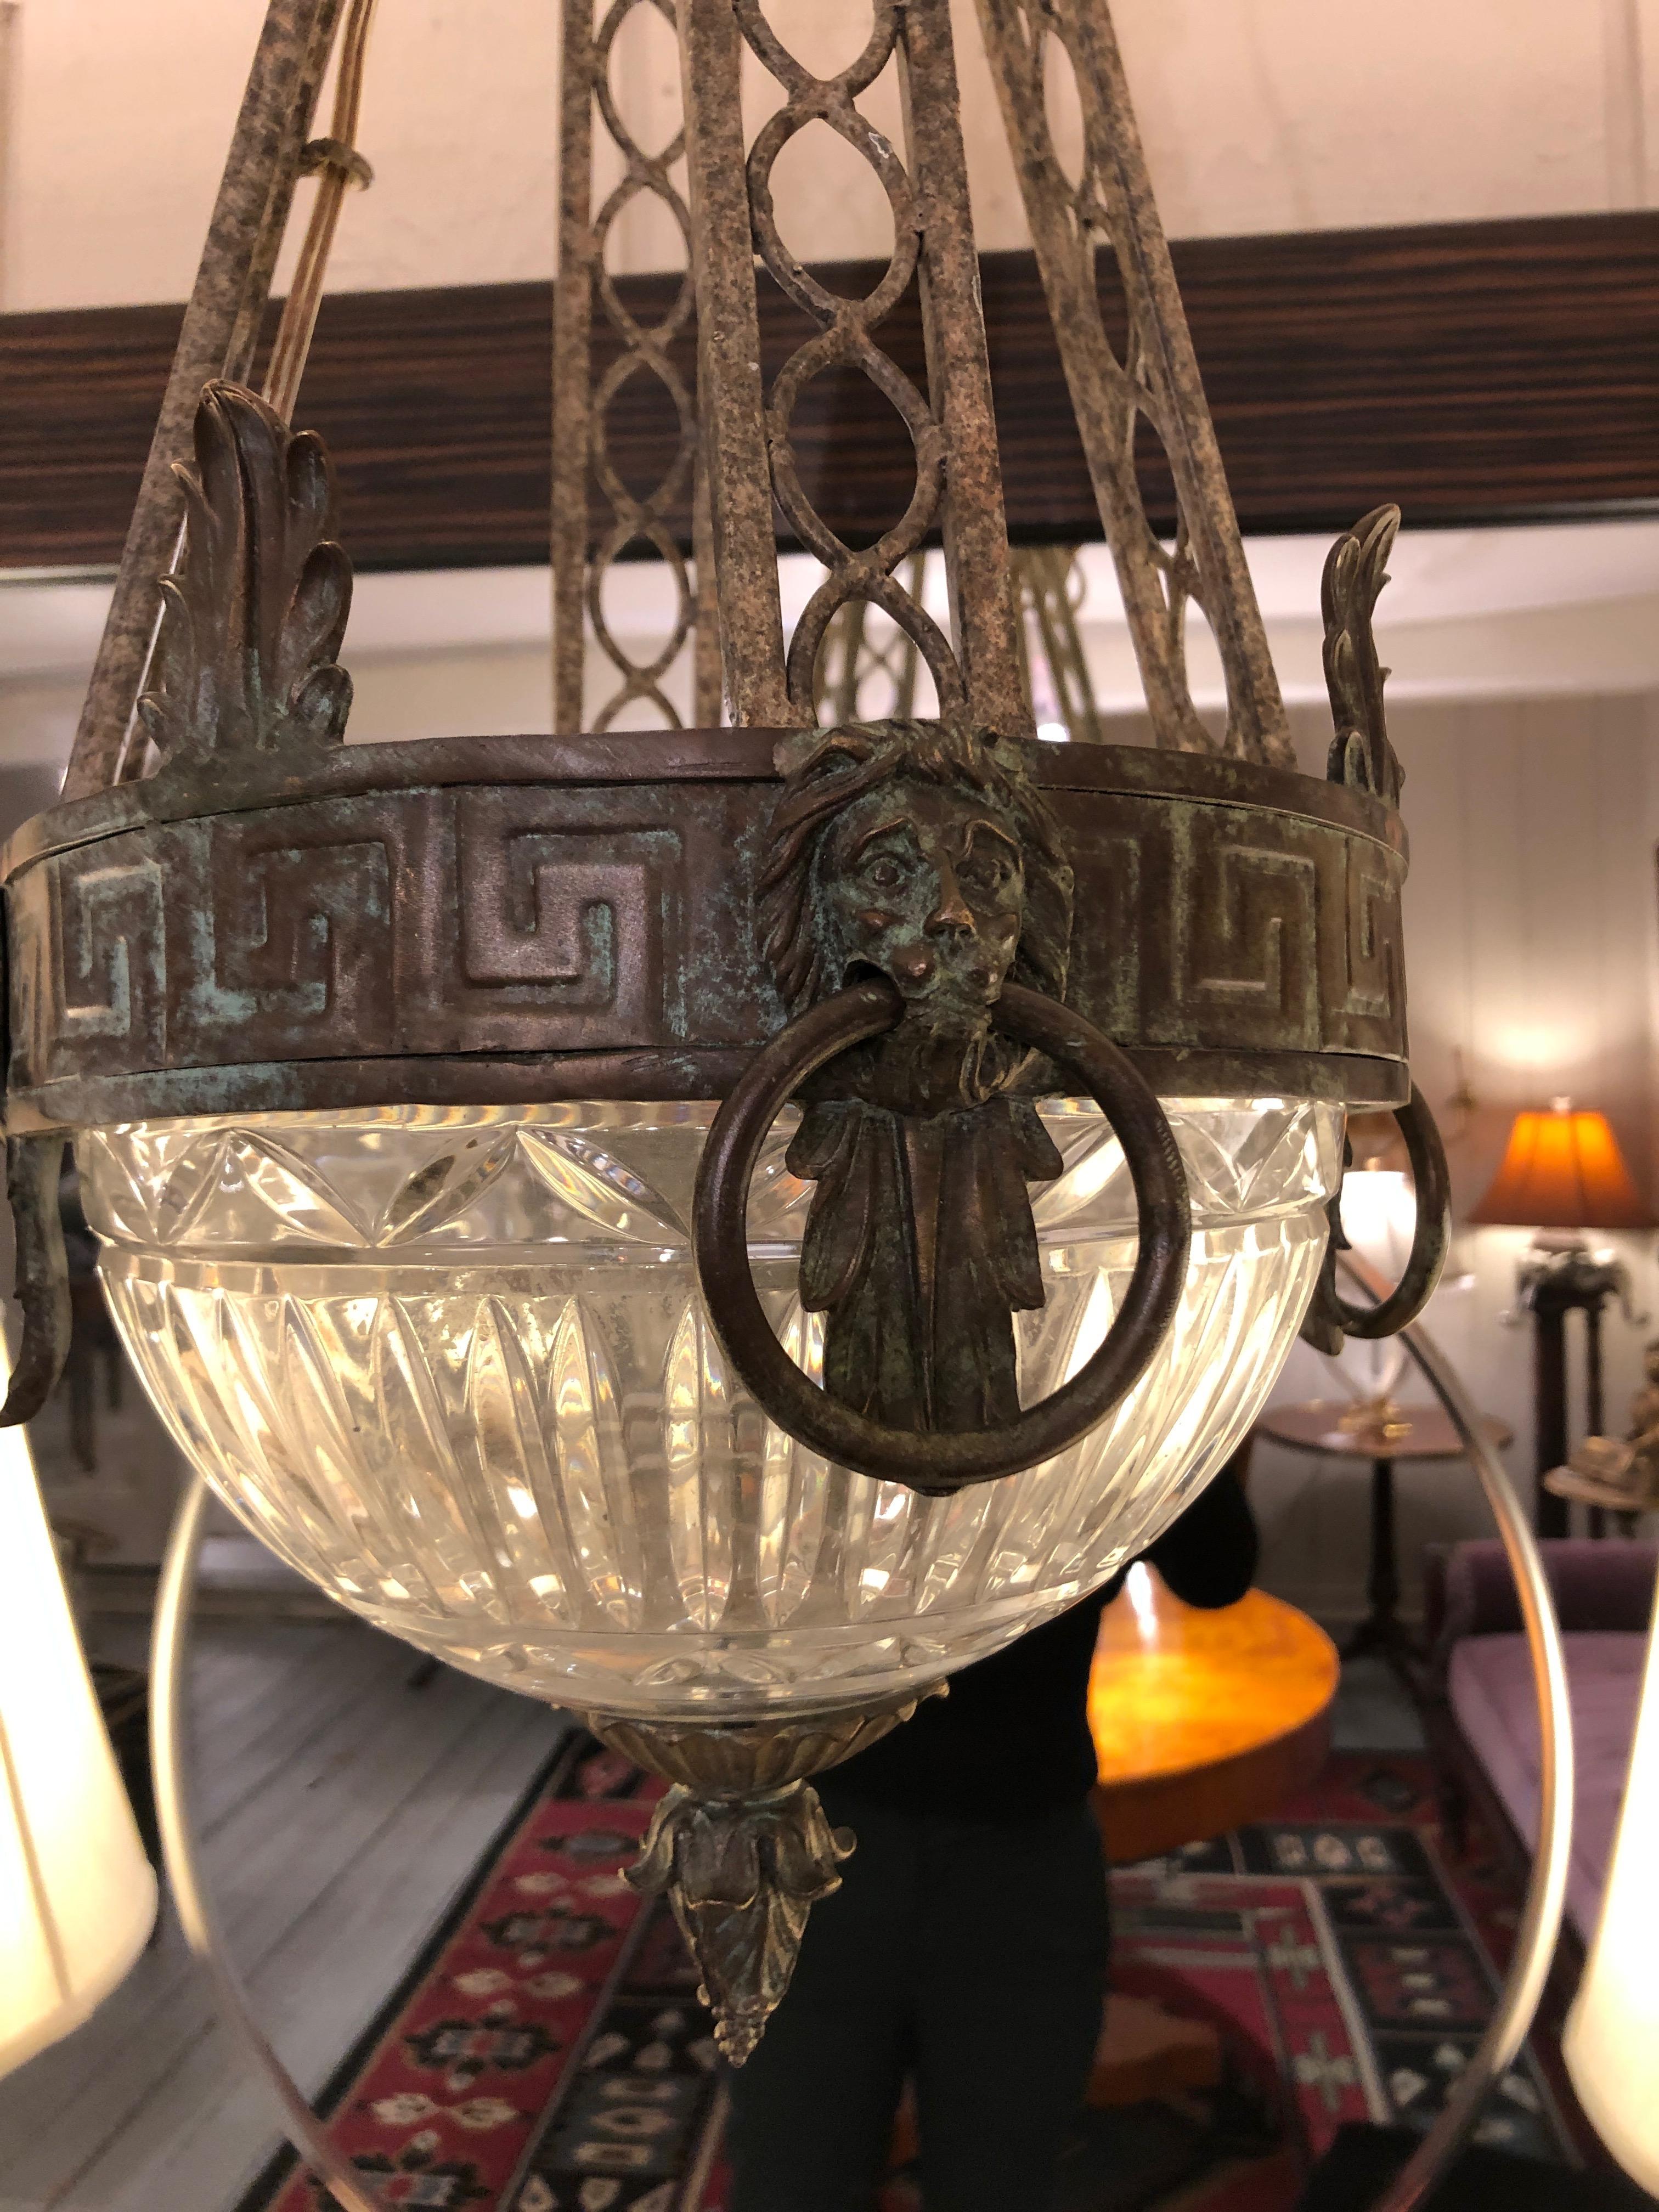 A stunning chandelier having a dome shaped cut glass bottom with handsome neoclassical iron top band of Greek keys and lions and triangular shaped arms that meet at the apex.
CT.